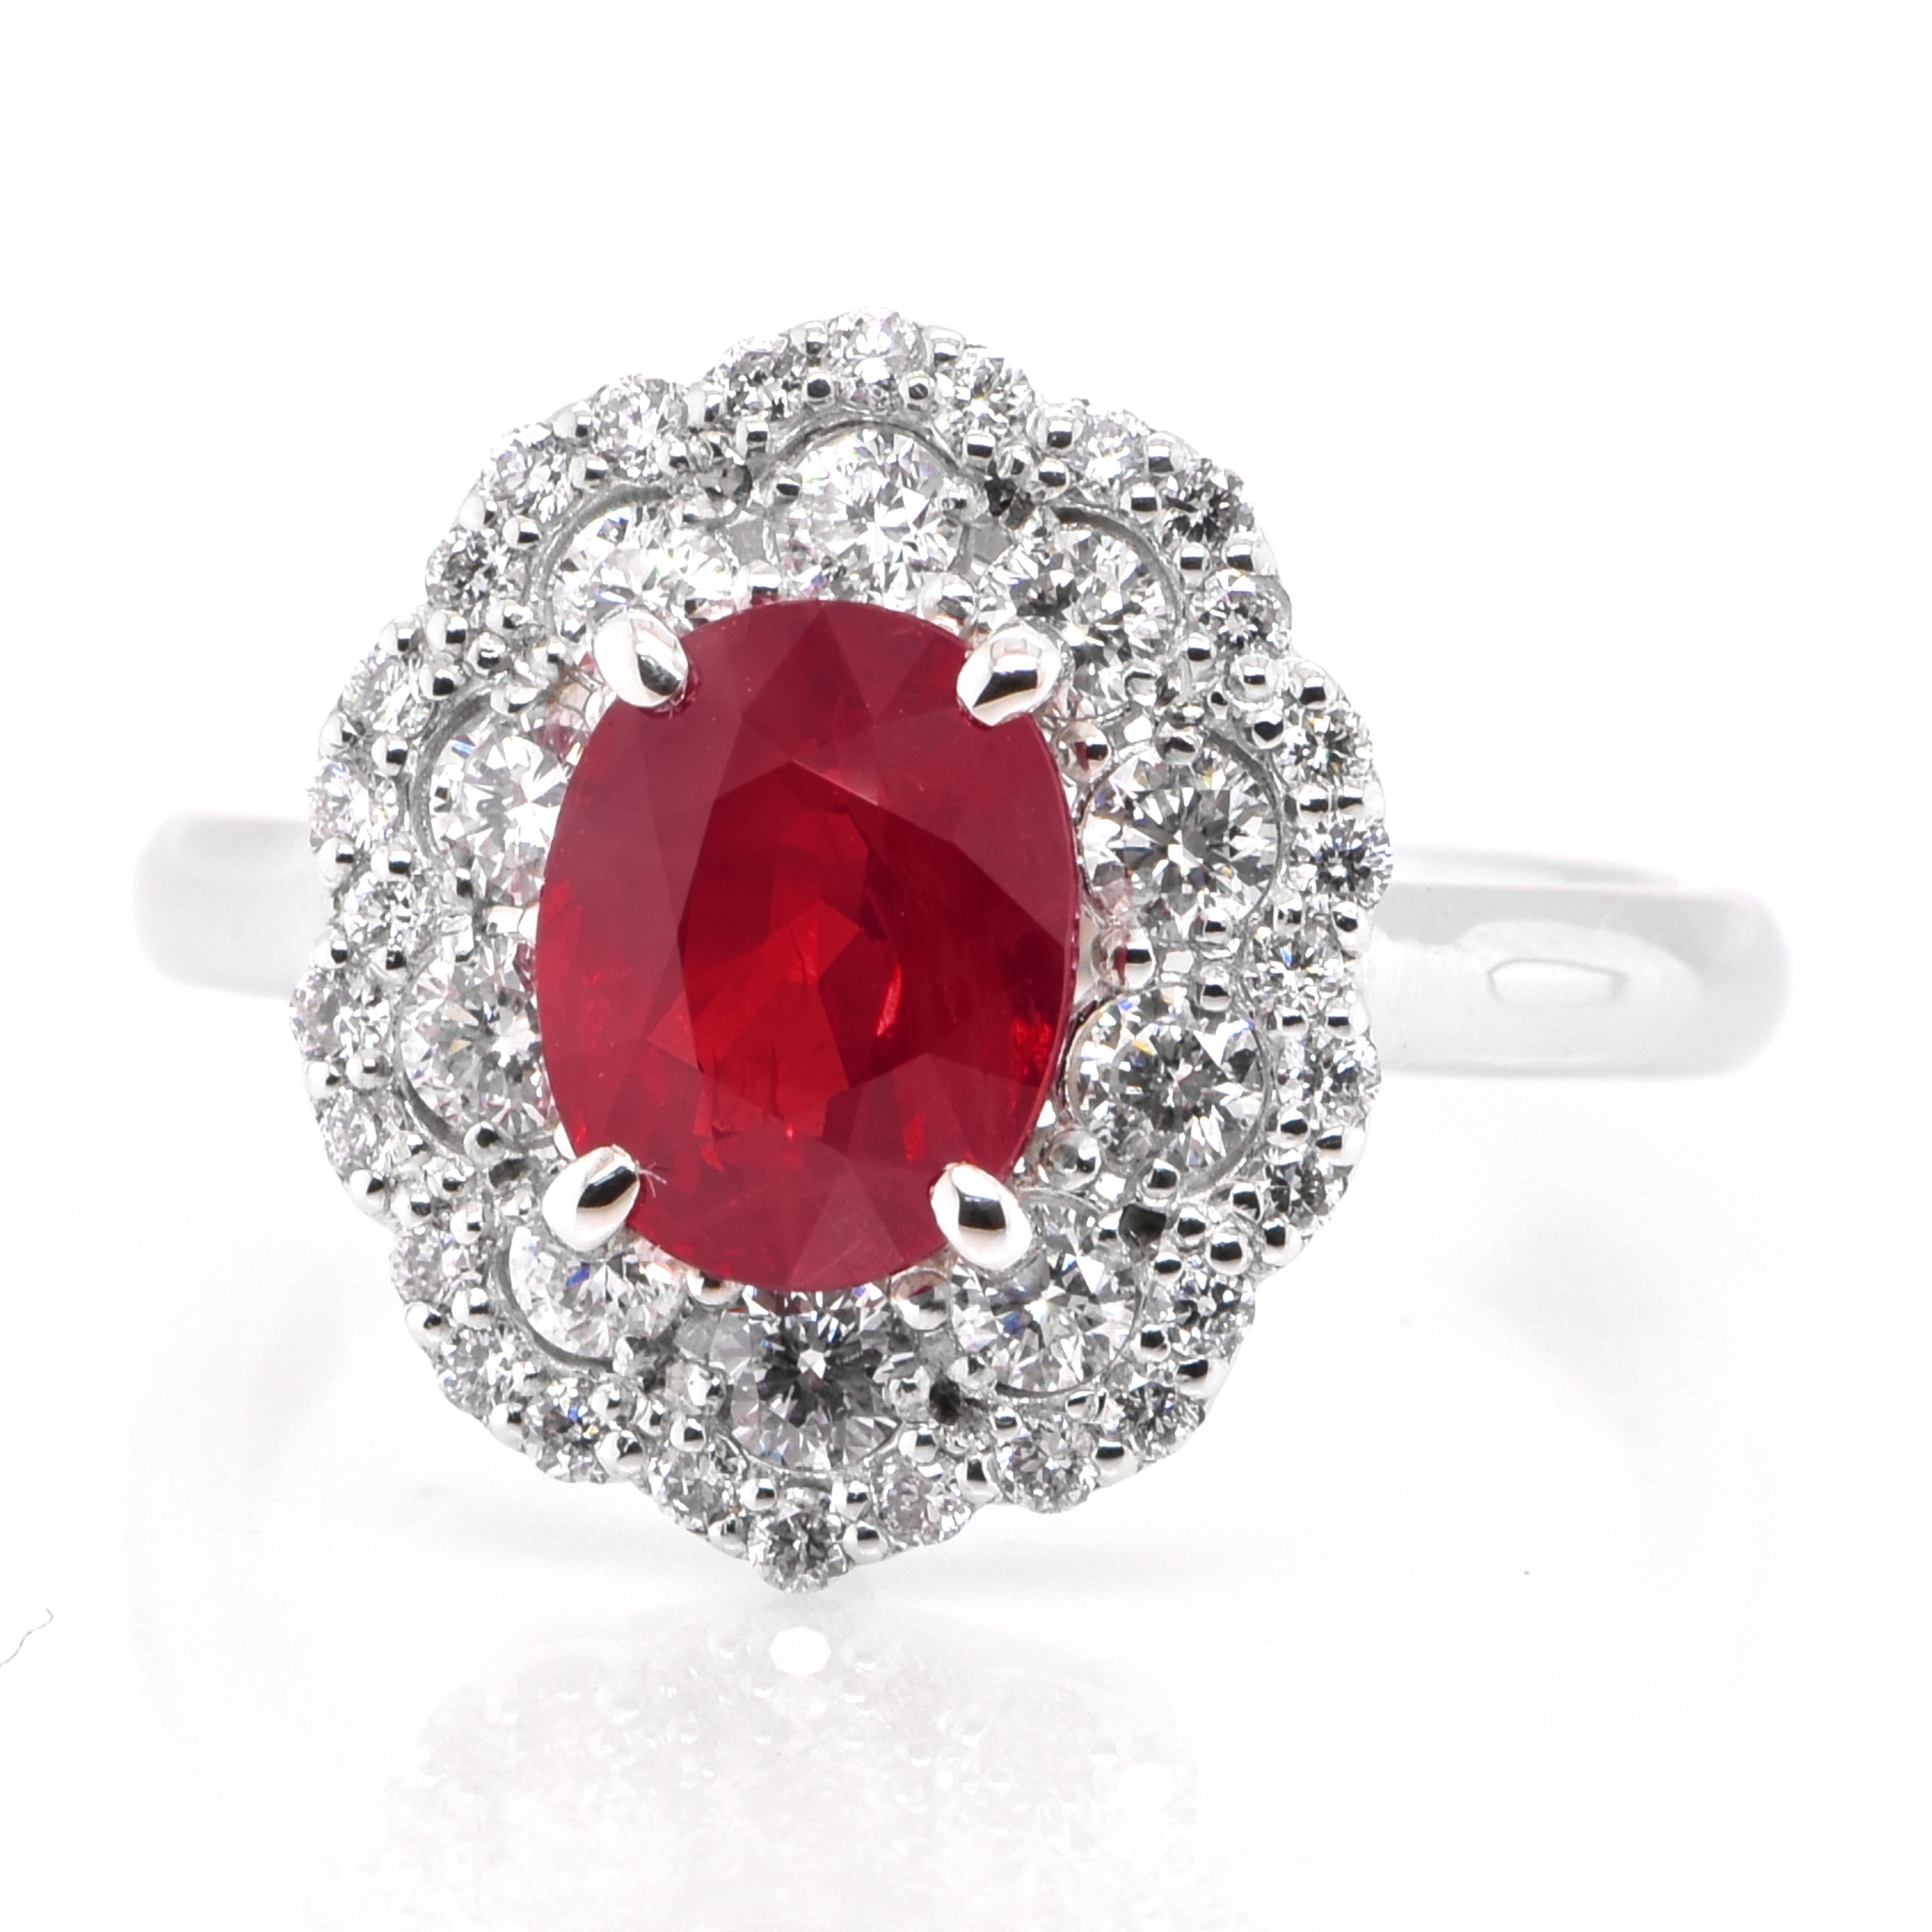 A beautiful Halo ring set in Platinum featuring a GIA Certified 2.06 Carat Natural Burmese (Myanmar) Ruby and 1.18 Carat Diamonds. Rubies are referred to as 